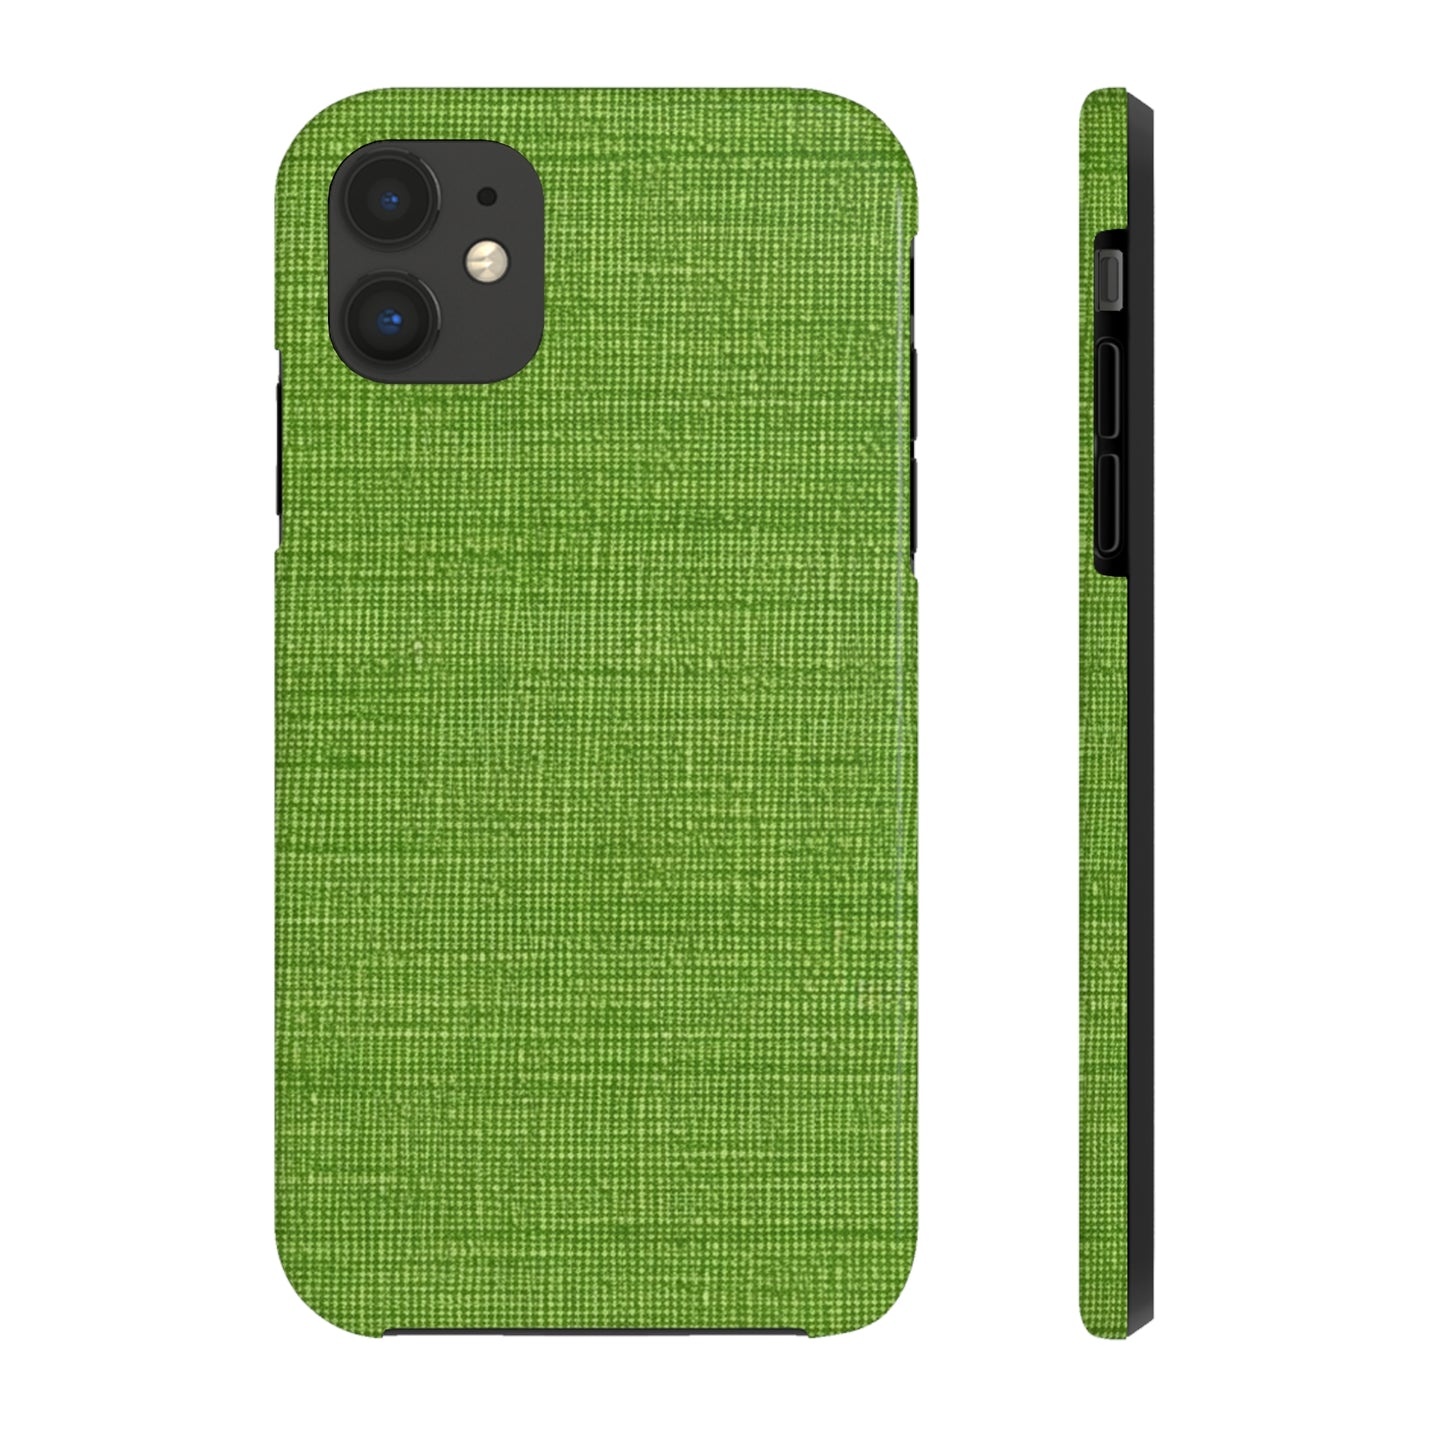 Olive Green Denim-Style: Seamless, Textured Fabric - Tough Phone Cases